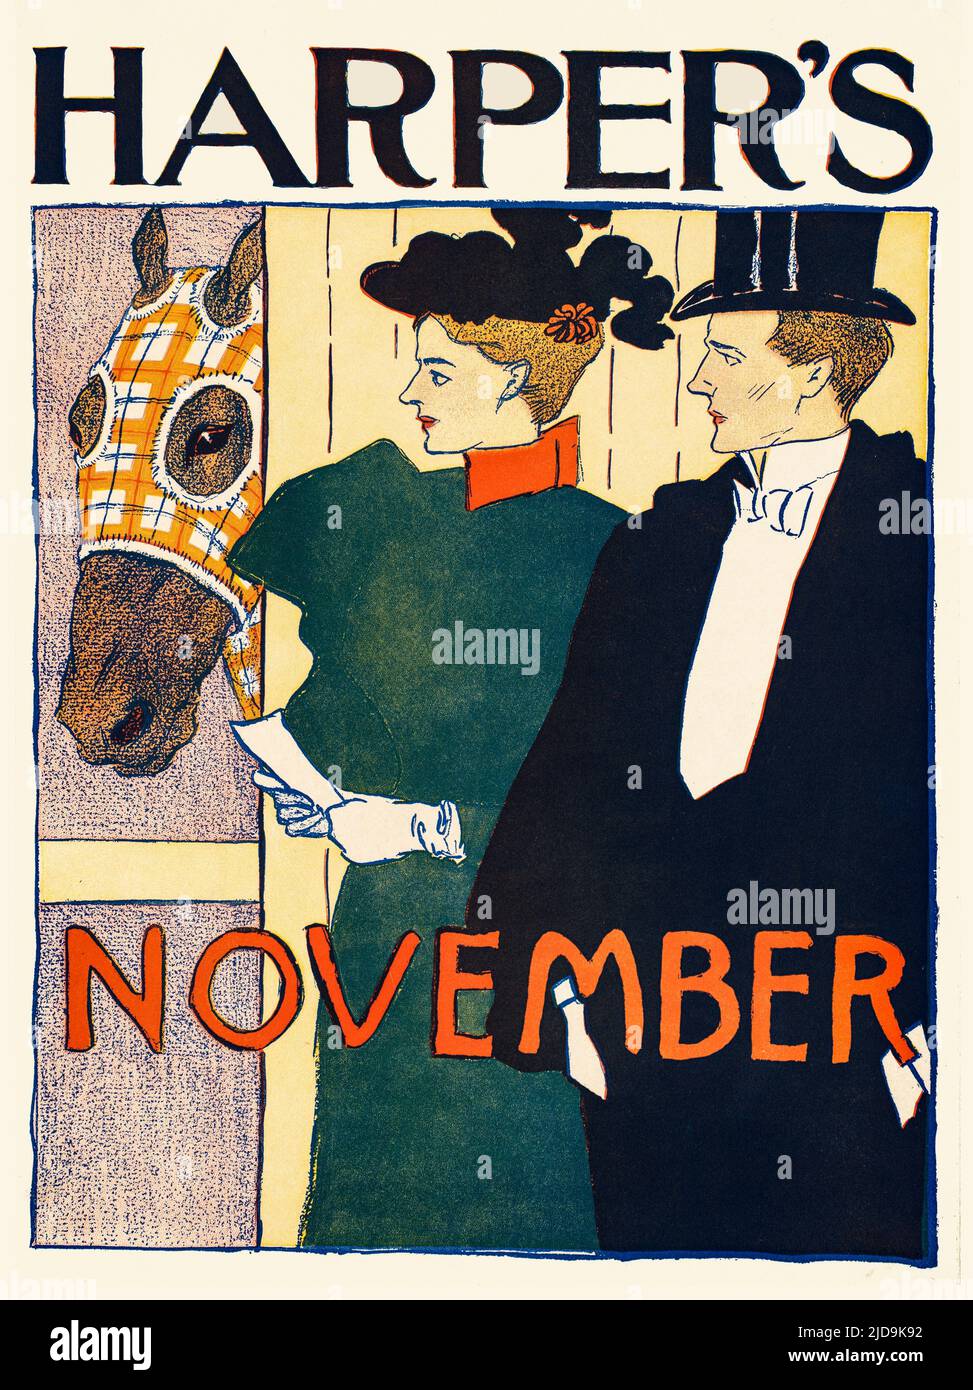 A turn of the 20th century illustration by Edward Penfield (1866-1925) considered by many to be the father of the American poster. Featuring an affluent couple with their stabled race horse. Harper’s Magazine, the oldest general-interest monthly in America. Stock Photo